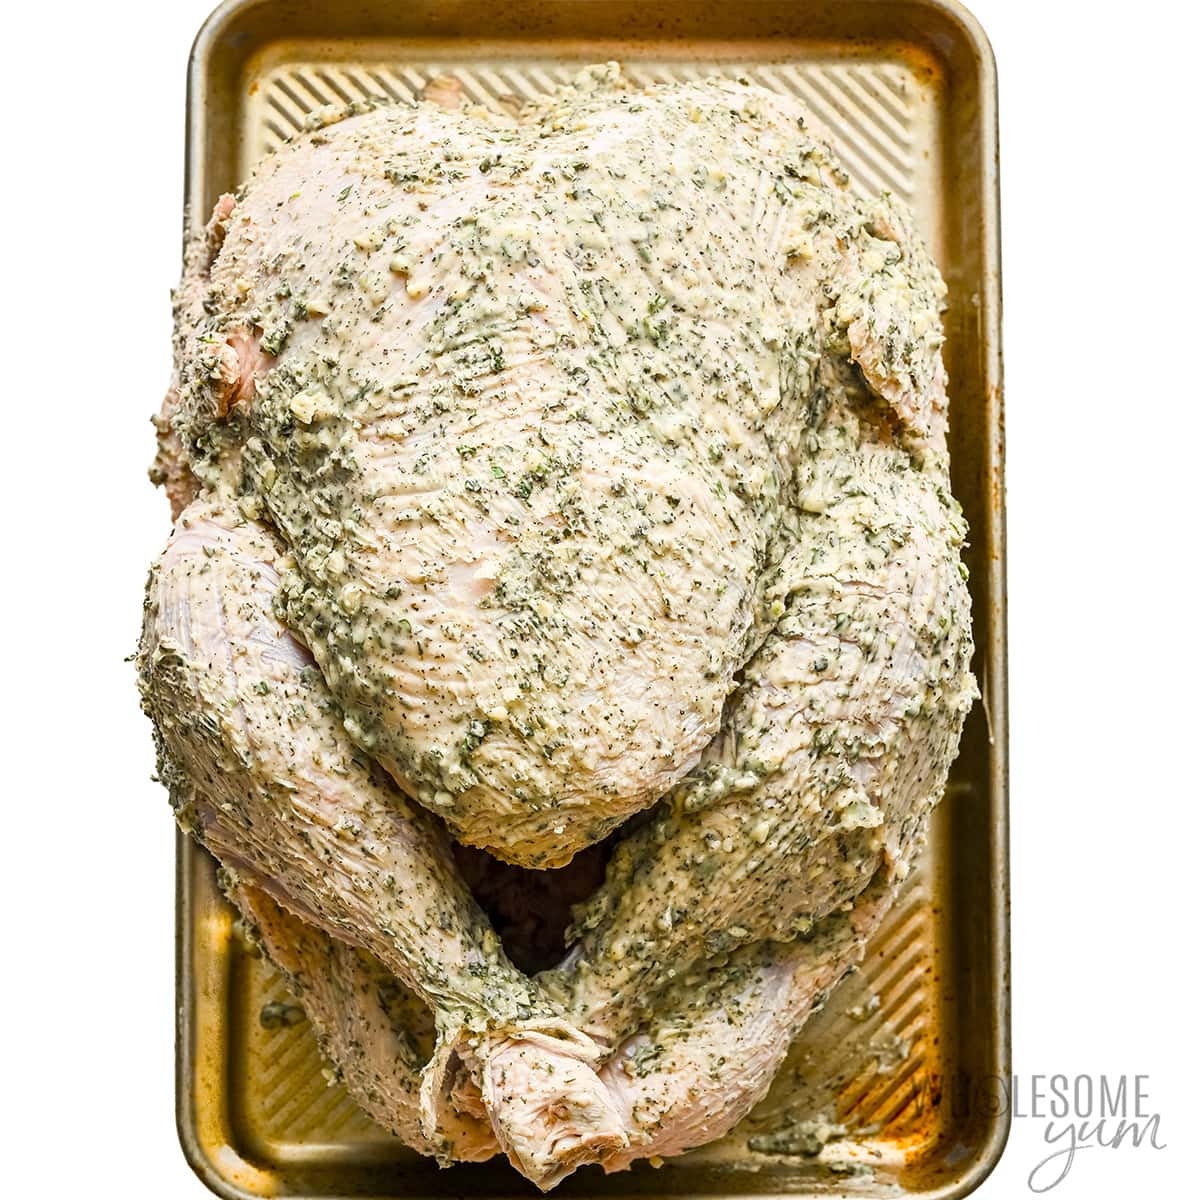 Herb butter rubbed on turkey.